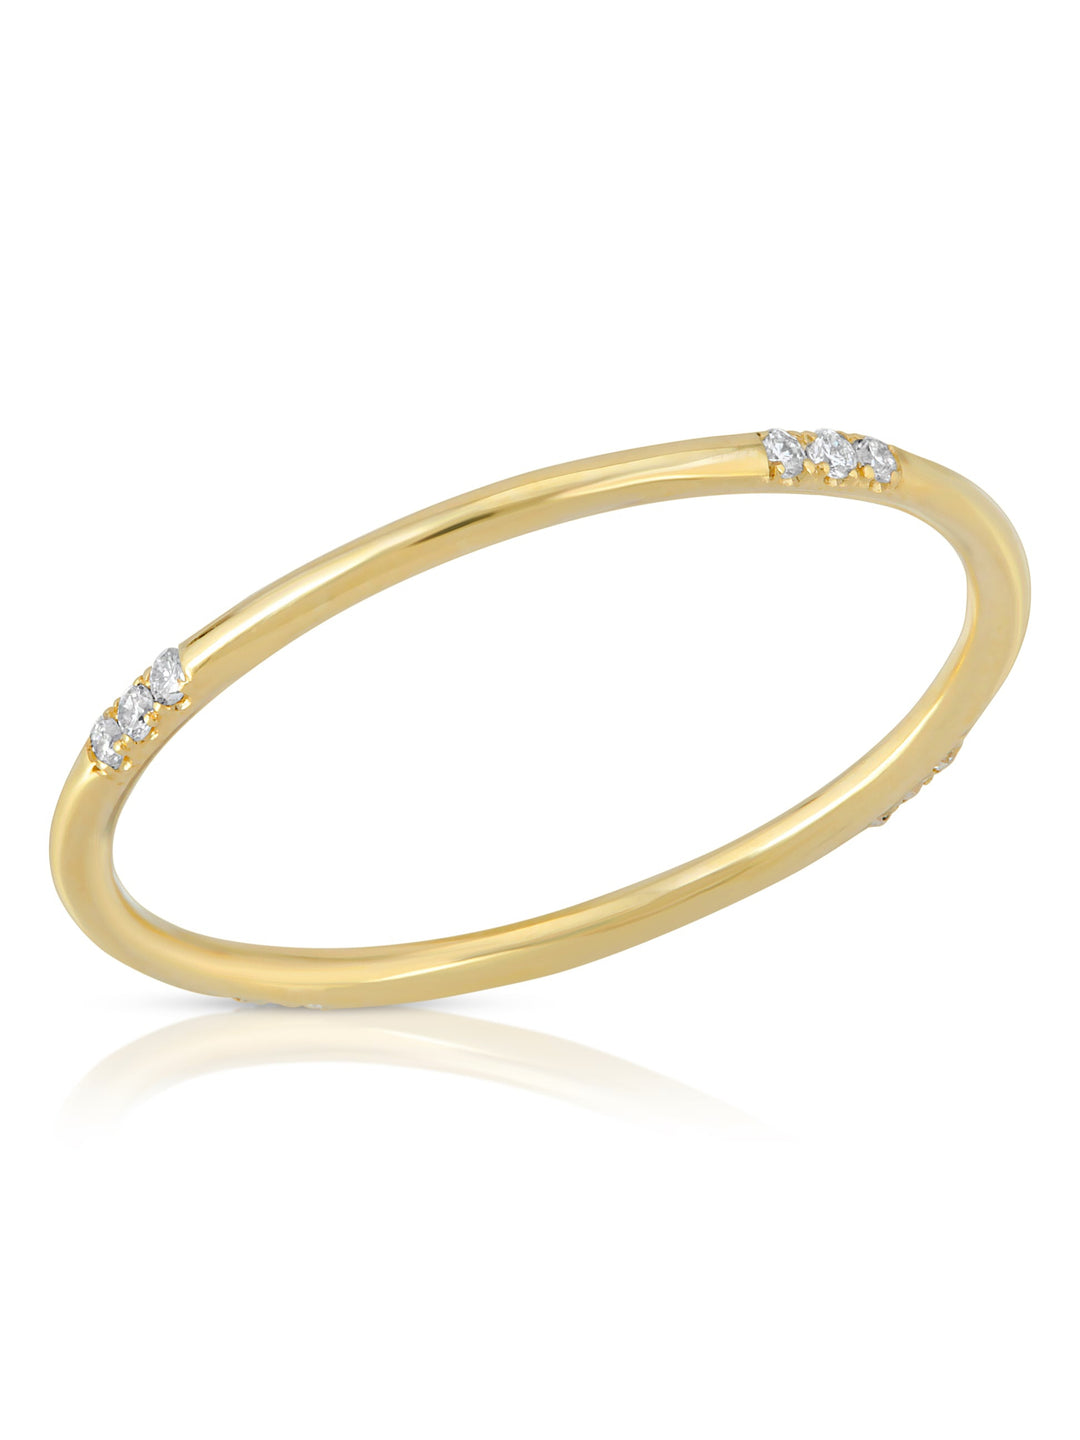 Pave Band Ring // 12 Diamonds The Gentle Pit